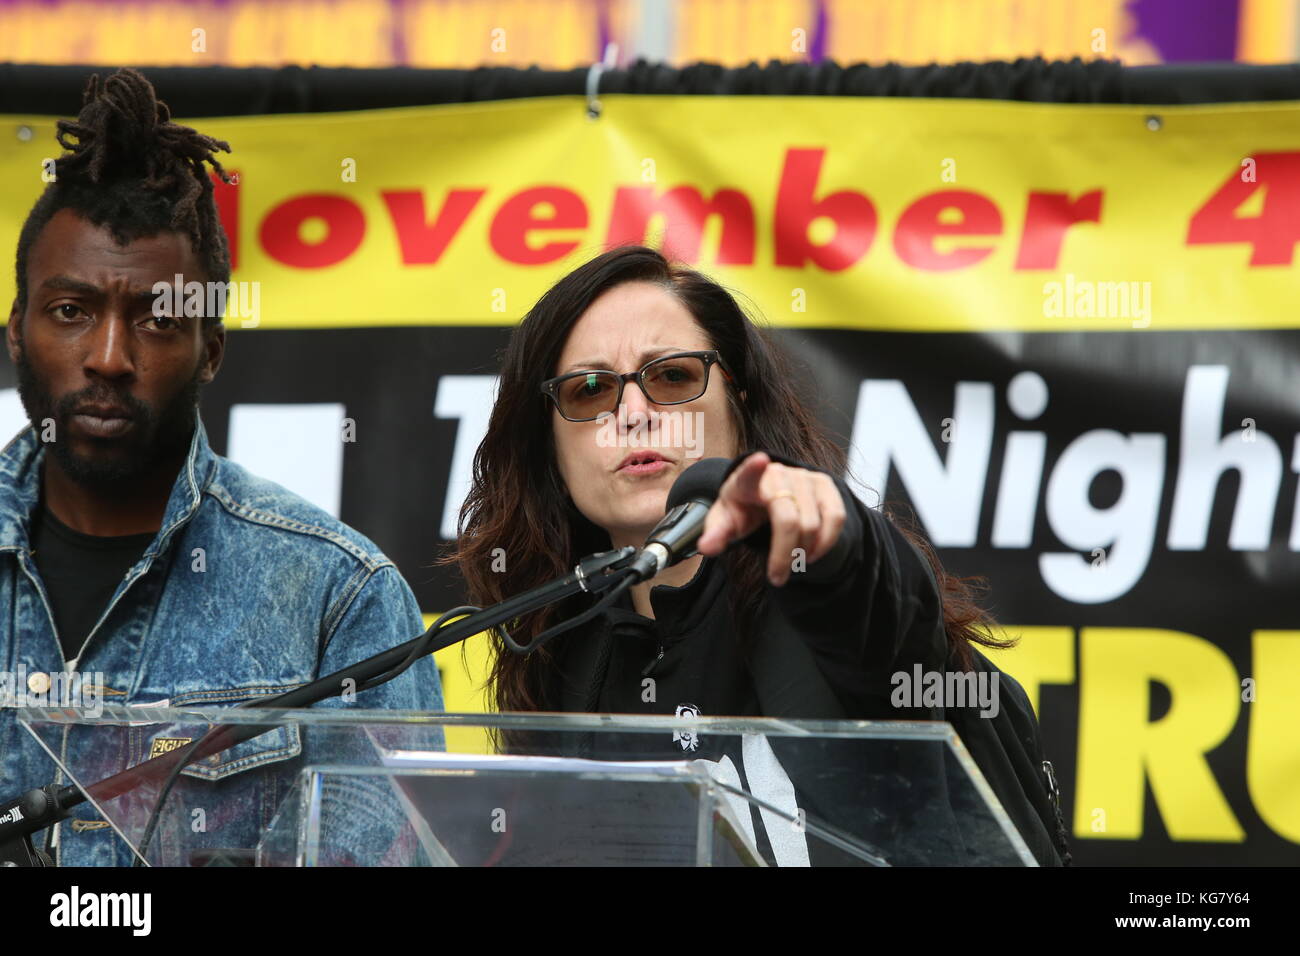 Manhattan, United States. 04th Nov, 2017. Jamal Mims and Sunsara Taylor on stage. Activists from Revolutionary Club of New York staged a rally in Times Square calling for a week of solid action in mark the one year anniversary of Donald Trump's upset victory against Hillary Clinton Credit: Andy Katz/Pacific Press/Alamy Live News Stock Photo